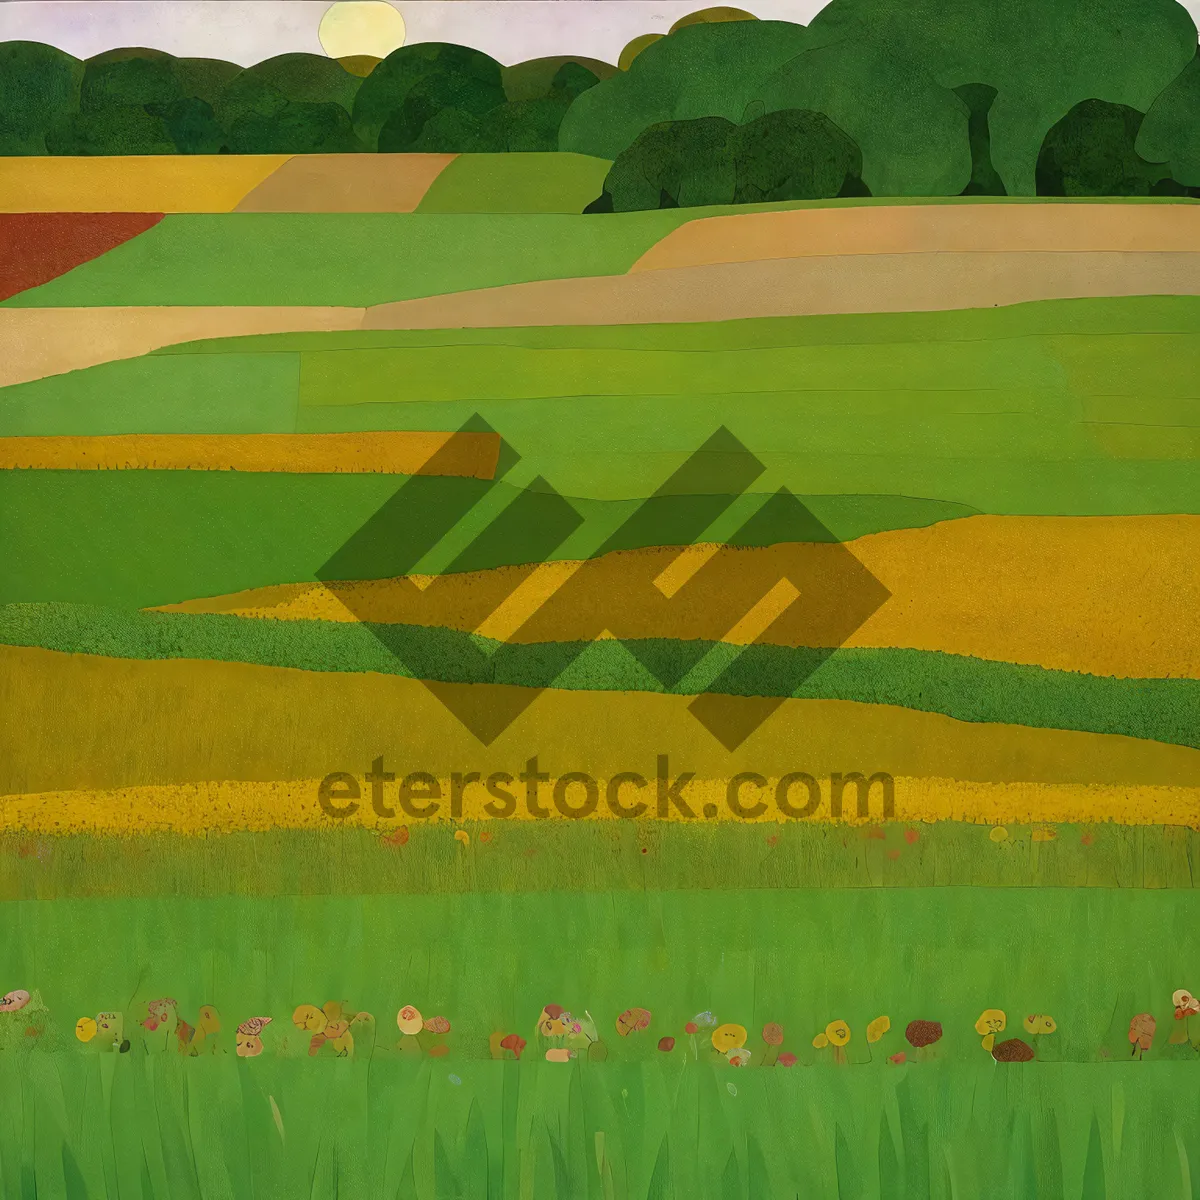 Picture of Golden Wheat Field Under Blue Sky